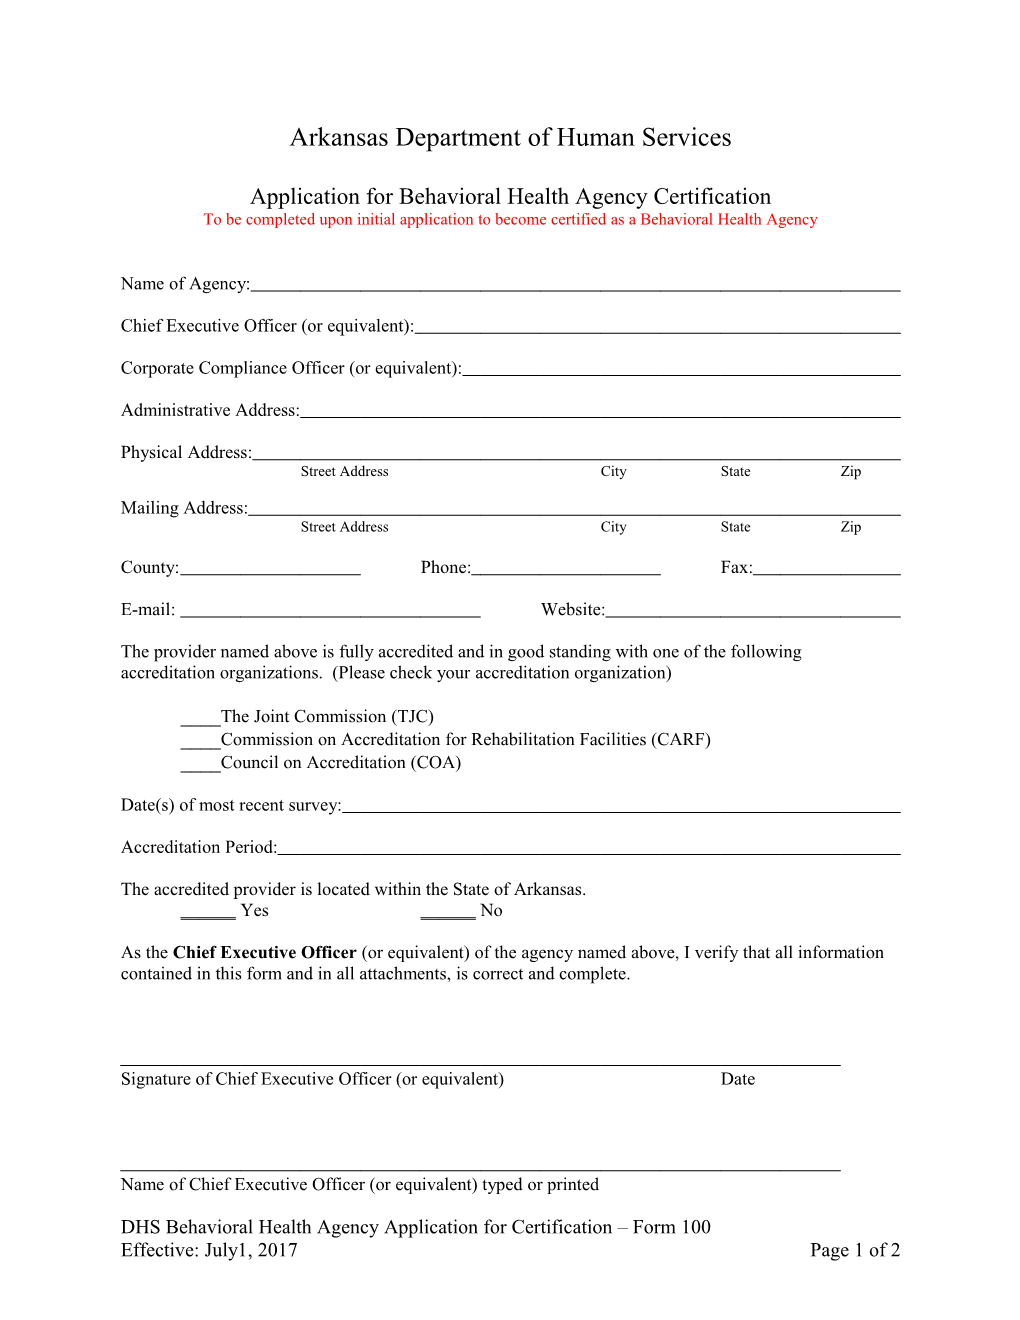 DHS BEHAVIORAL HEALTH AGENCY CERTIFICATION Form 100 - Application for New Agency